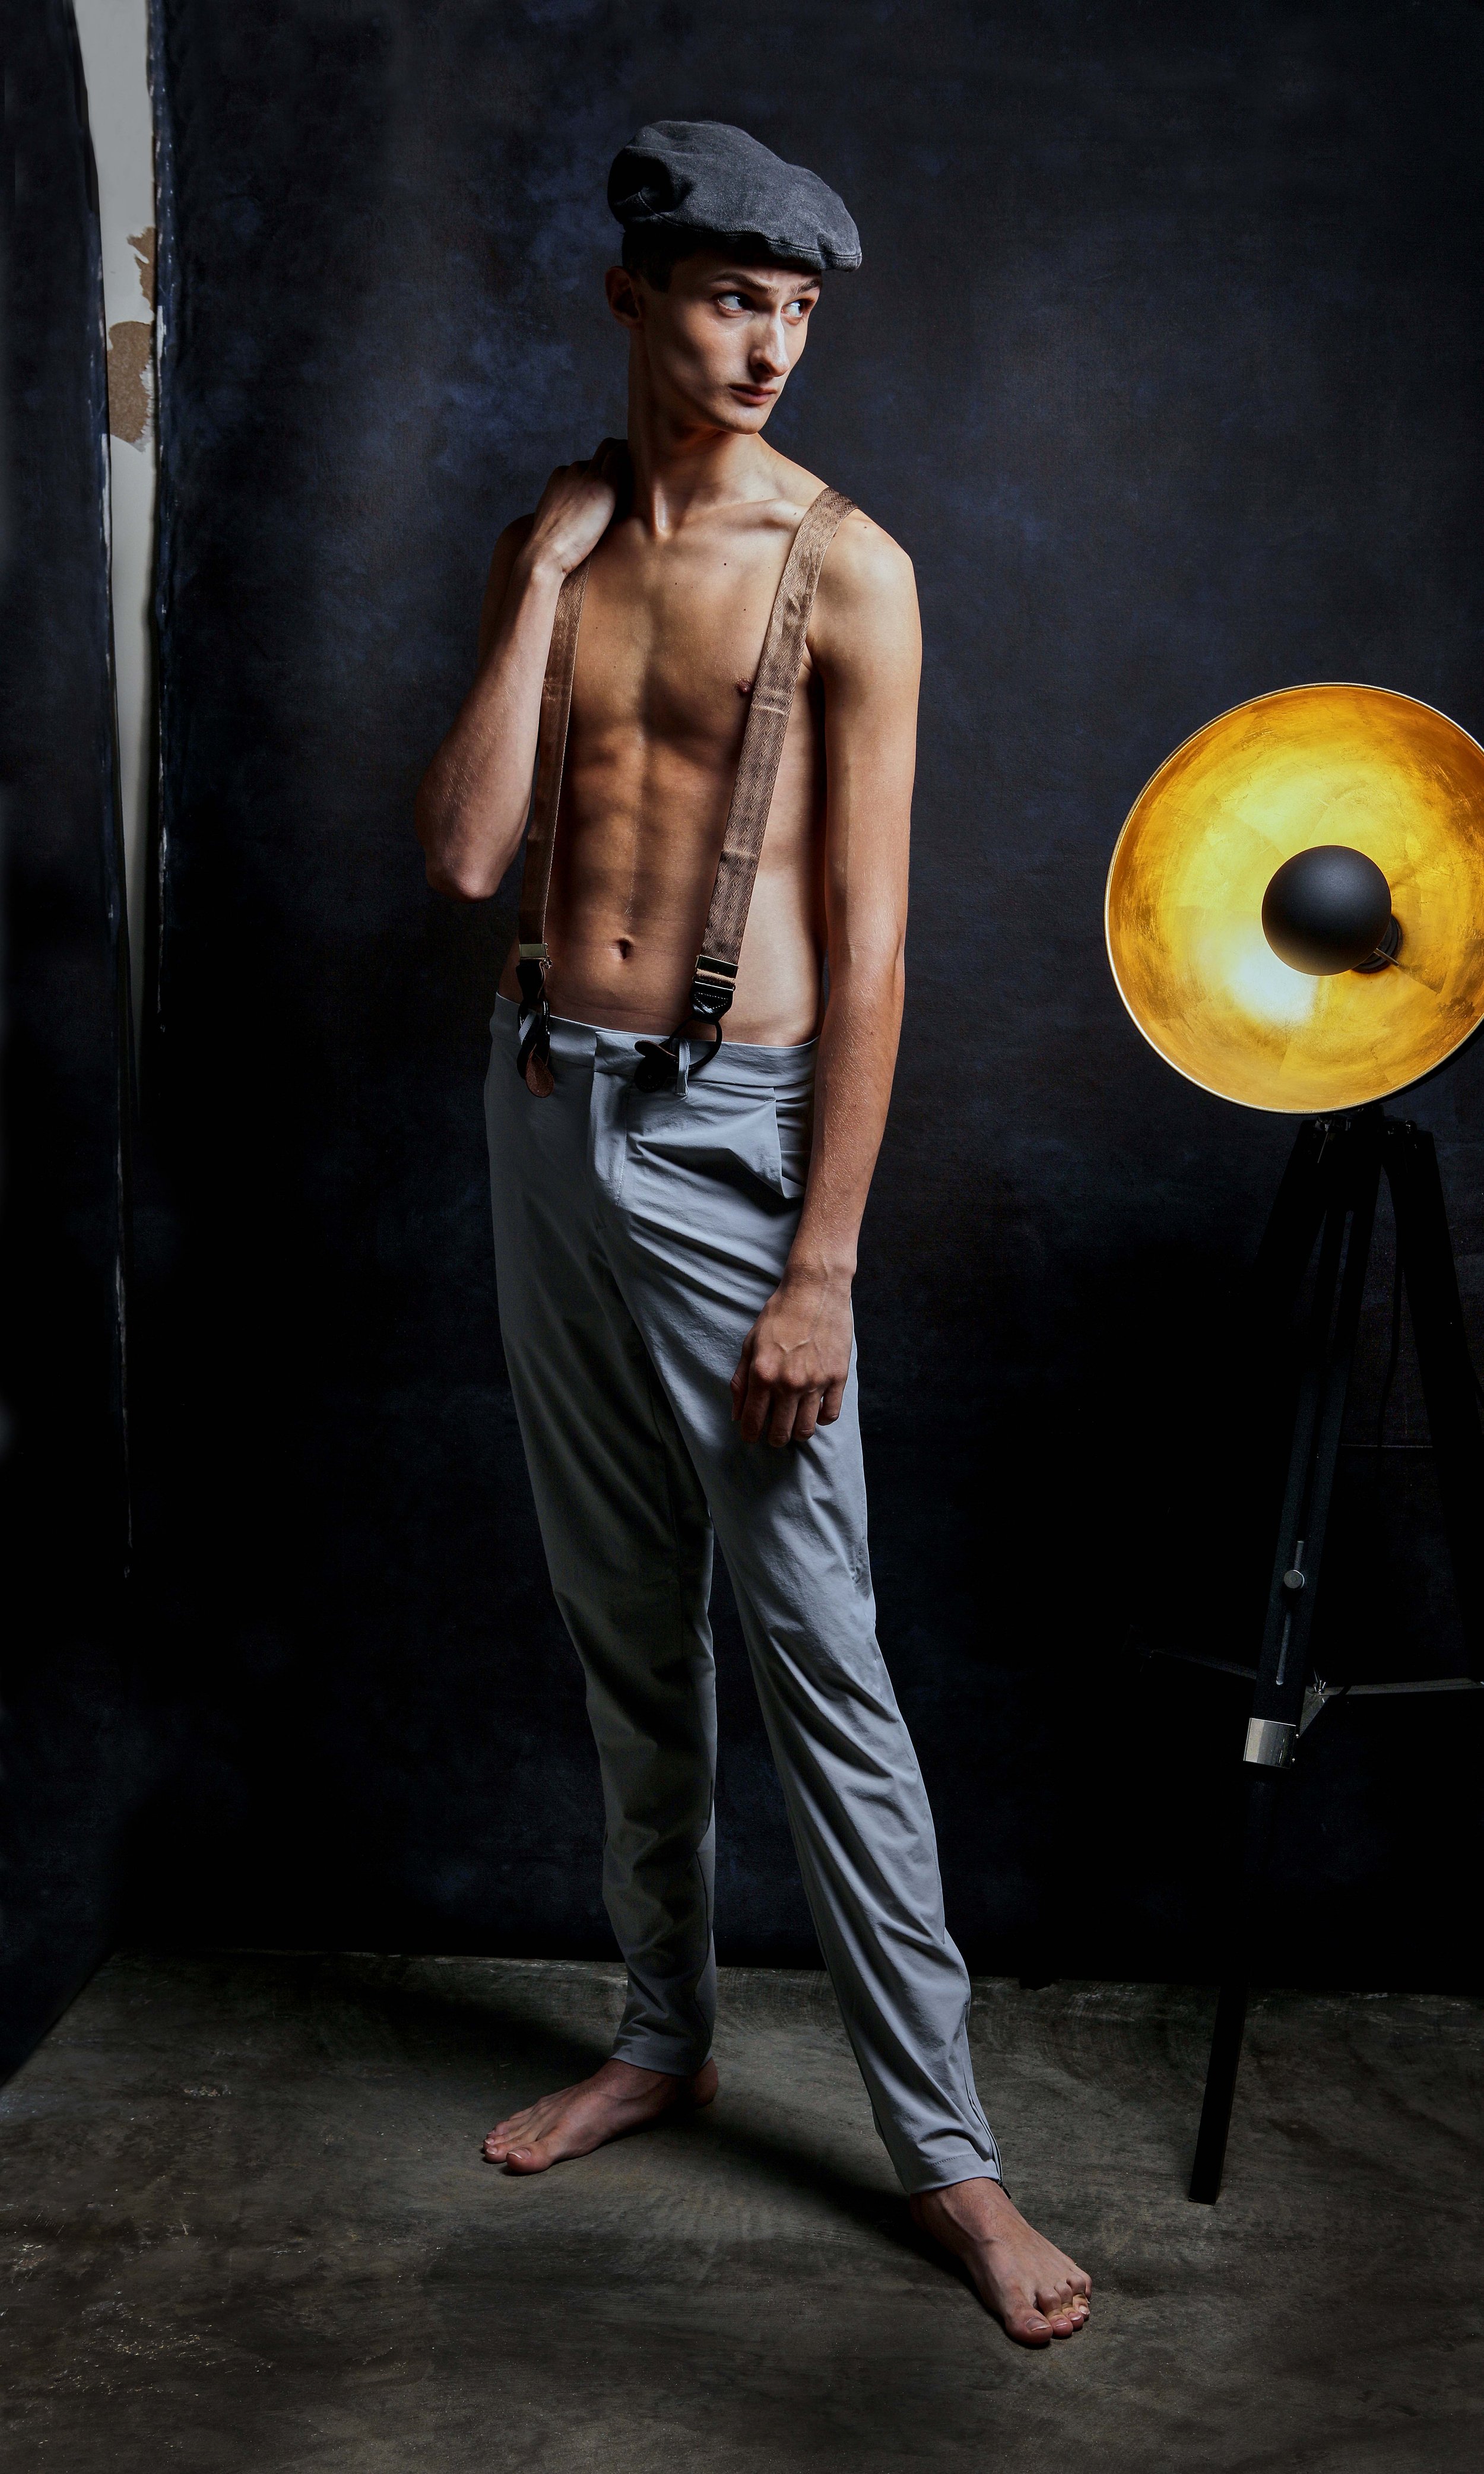 Young Male Model With Large Light to Side_47A5715.jpg